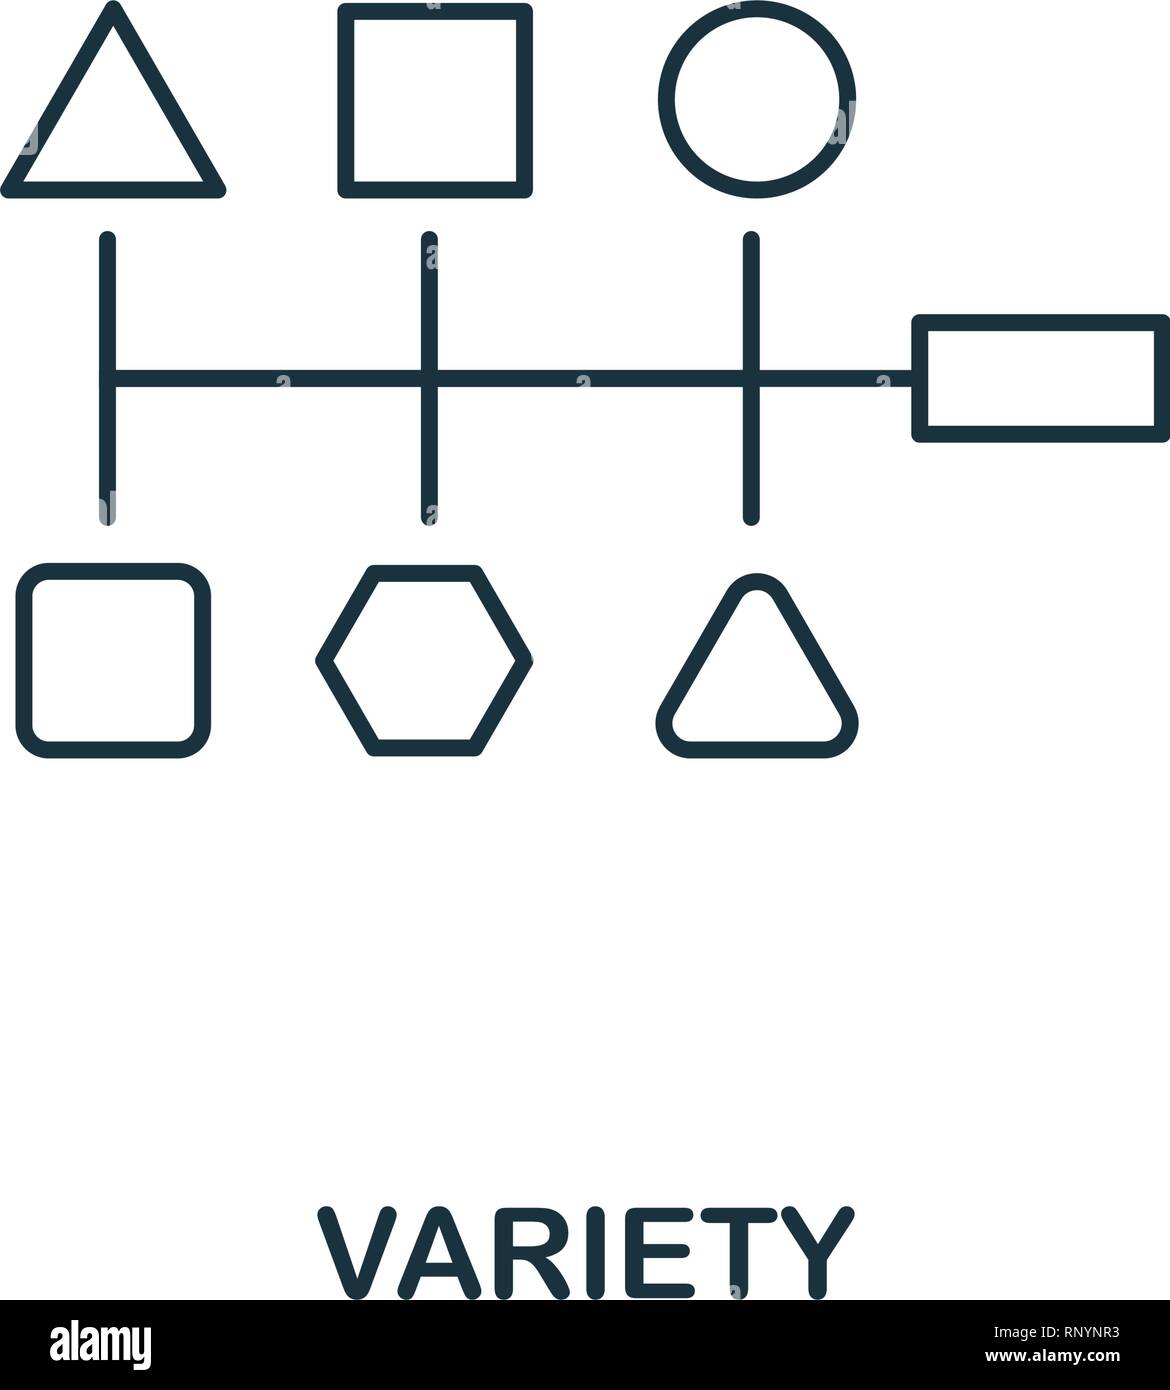 Variety outline icon. Thin line style from big data icons collection. Pixel perfect simple element variety icon for web design, apps, software, print Stock Vector